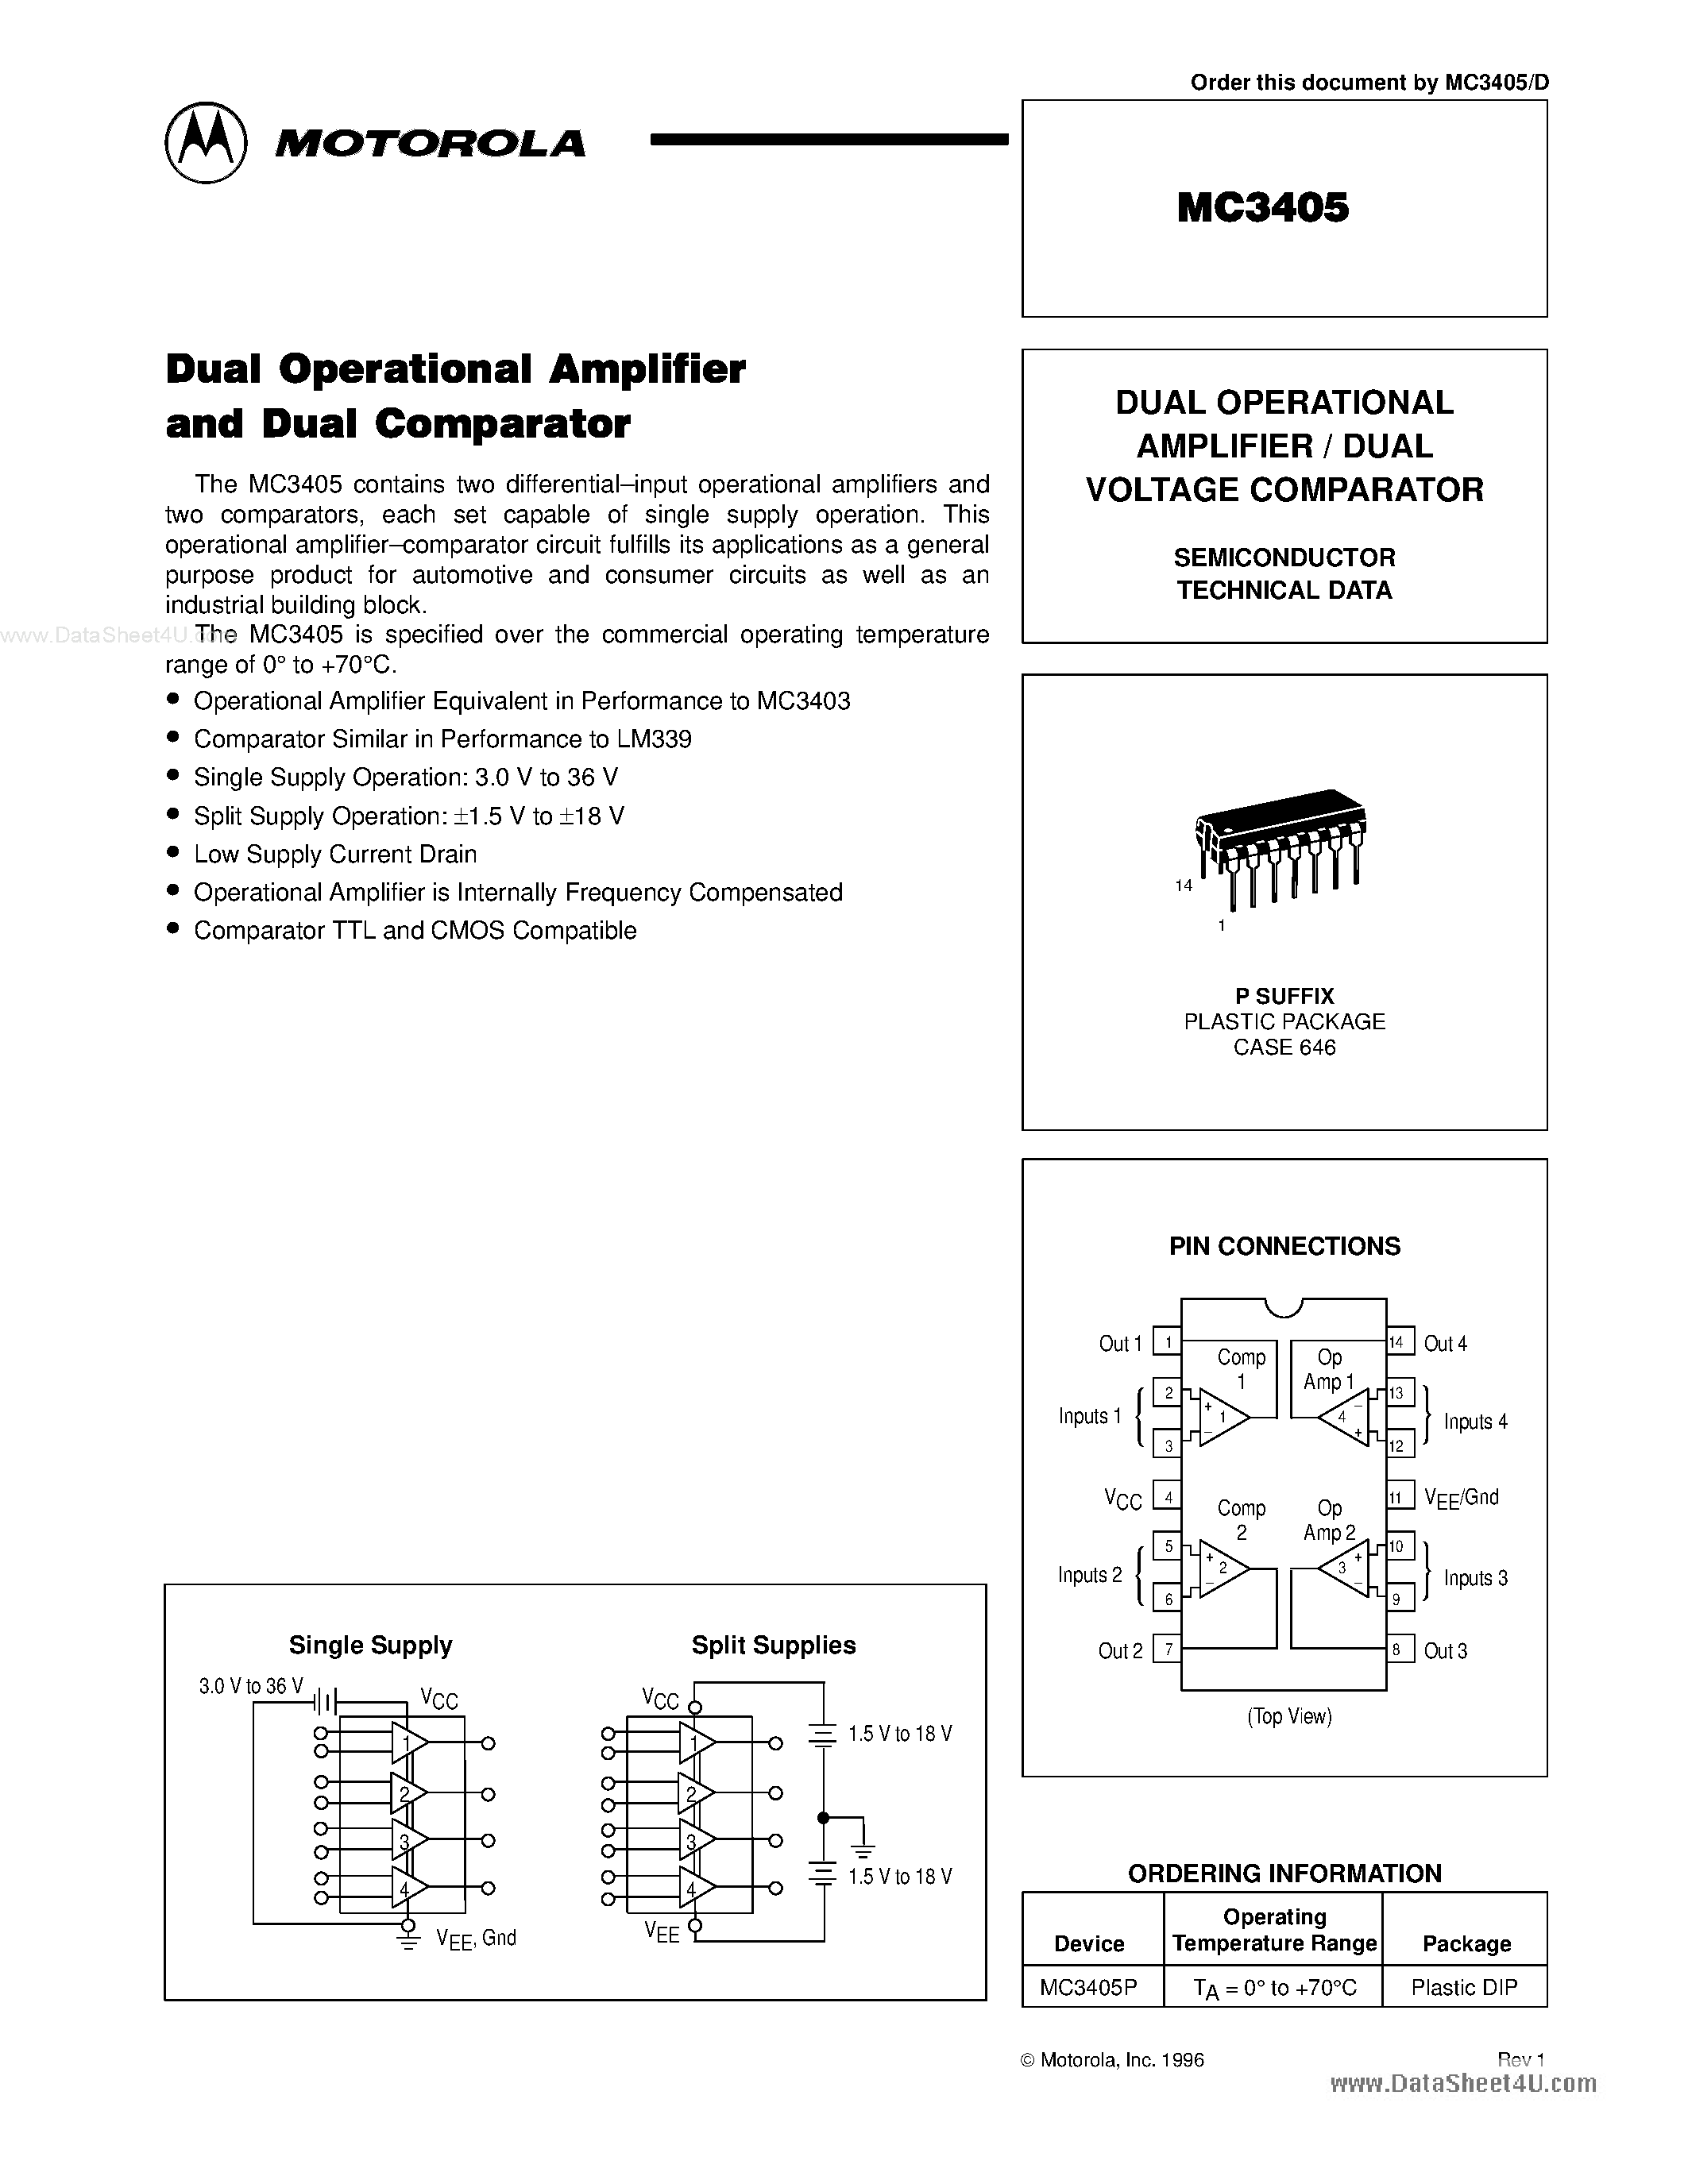 Datasheet MC3405 - DUAL OPERATIONAL AMPLIFIER / DUAL VOLTAGE COMPARATOR page 1